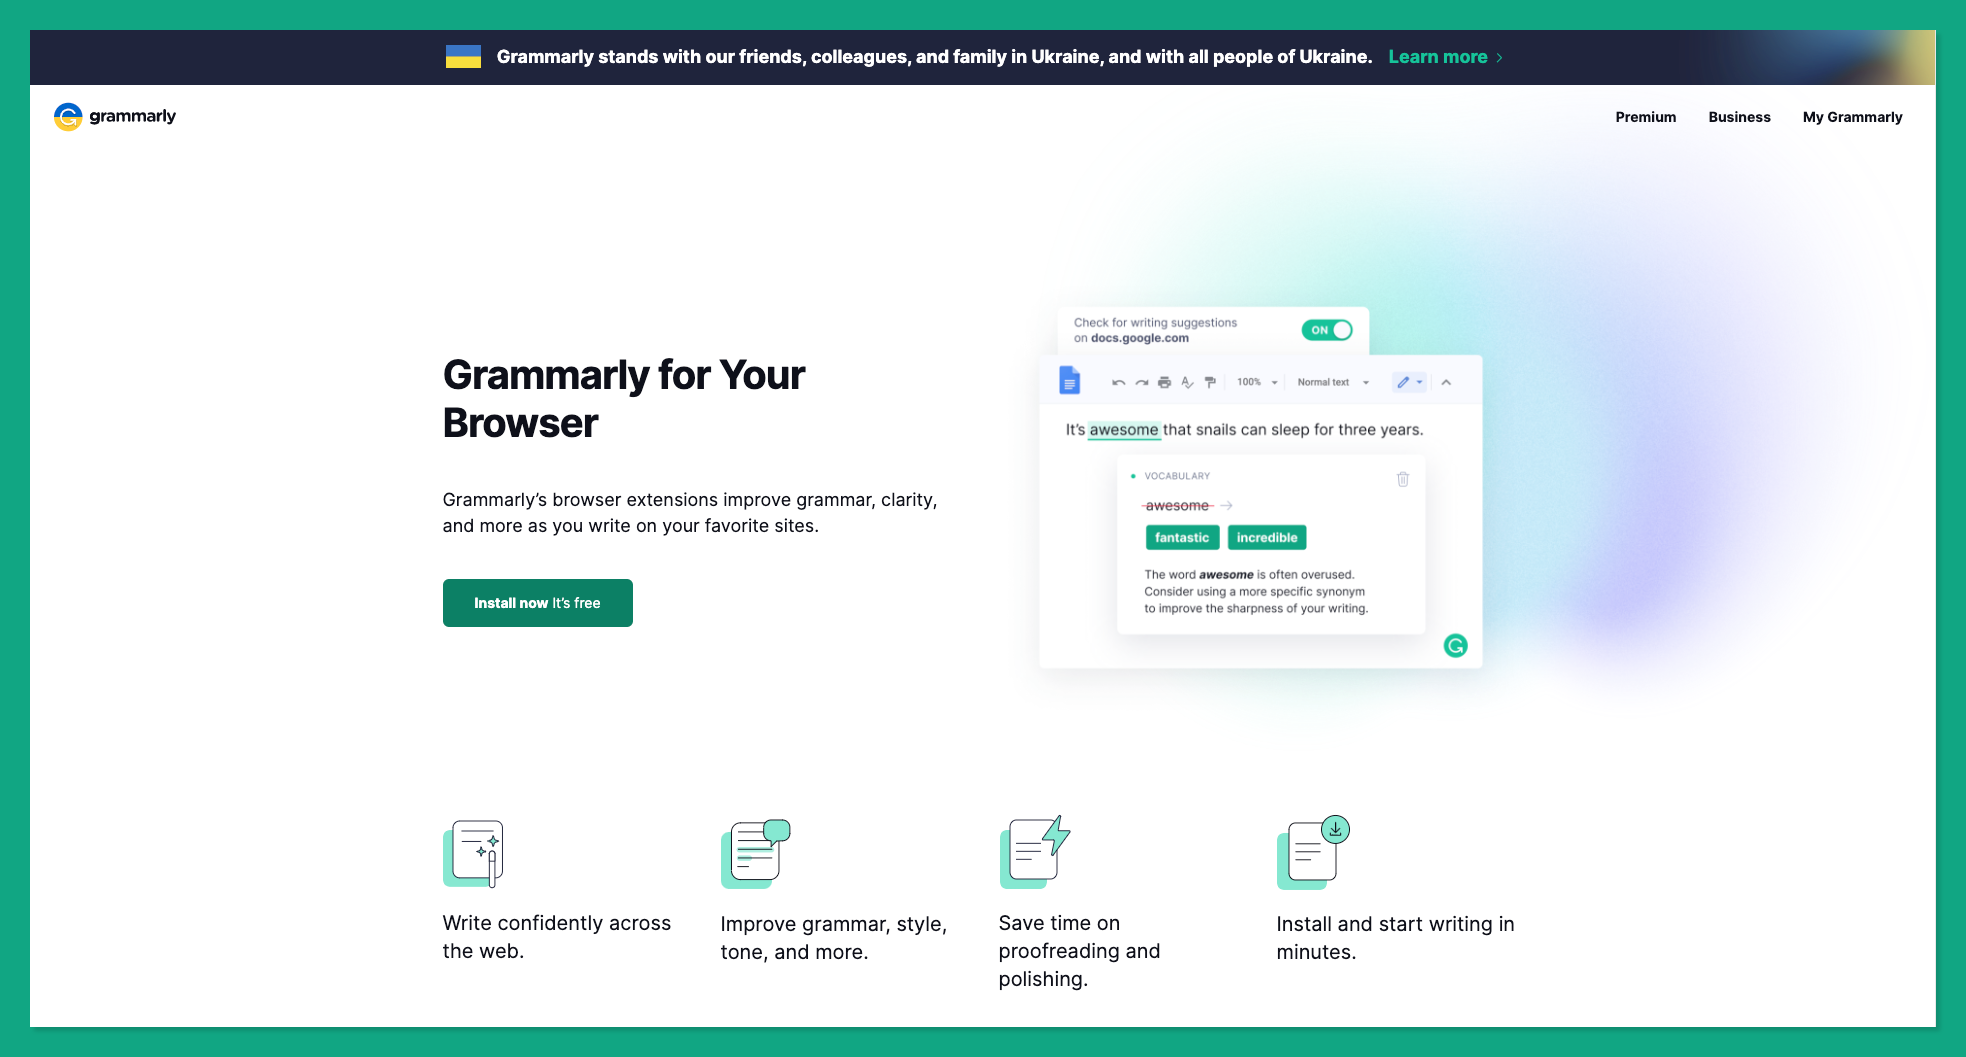 Grammarlys browser extensions improve grammar, clarity, and more as you write on your favorite sites.